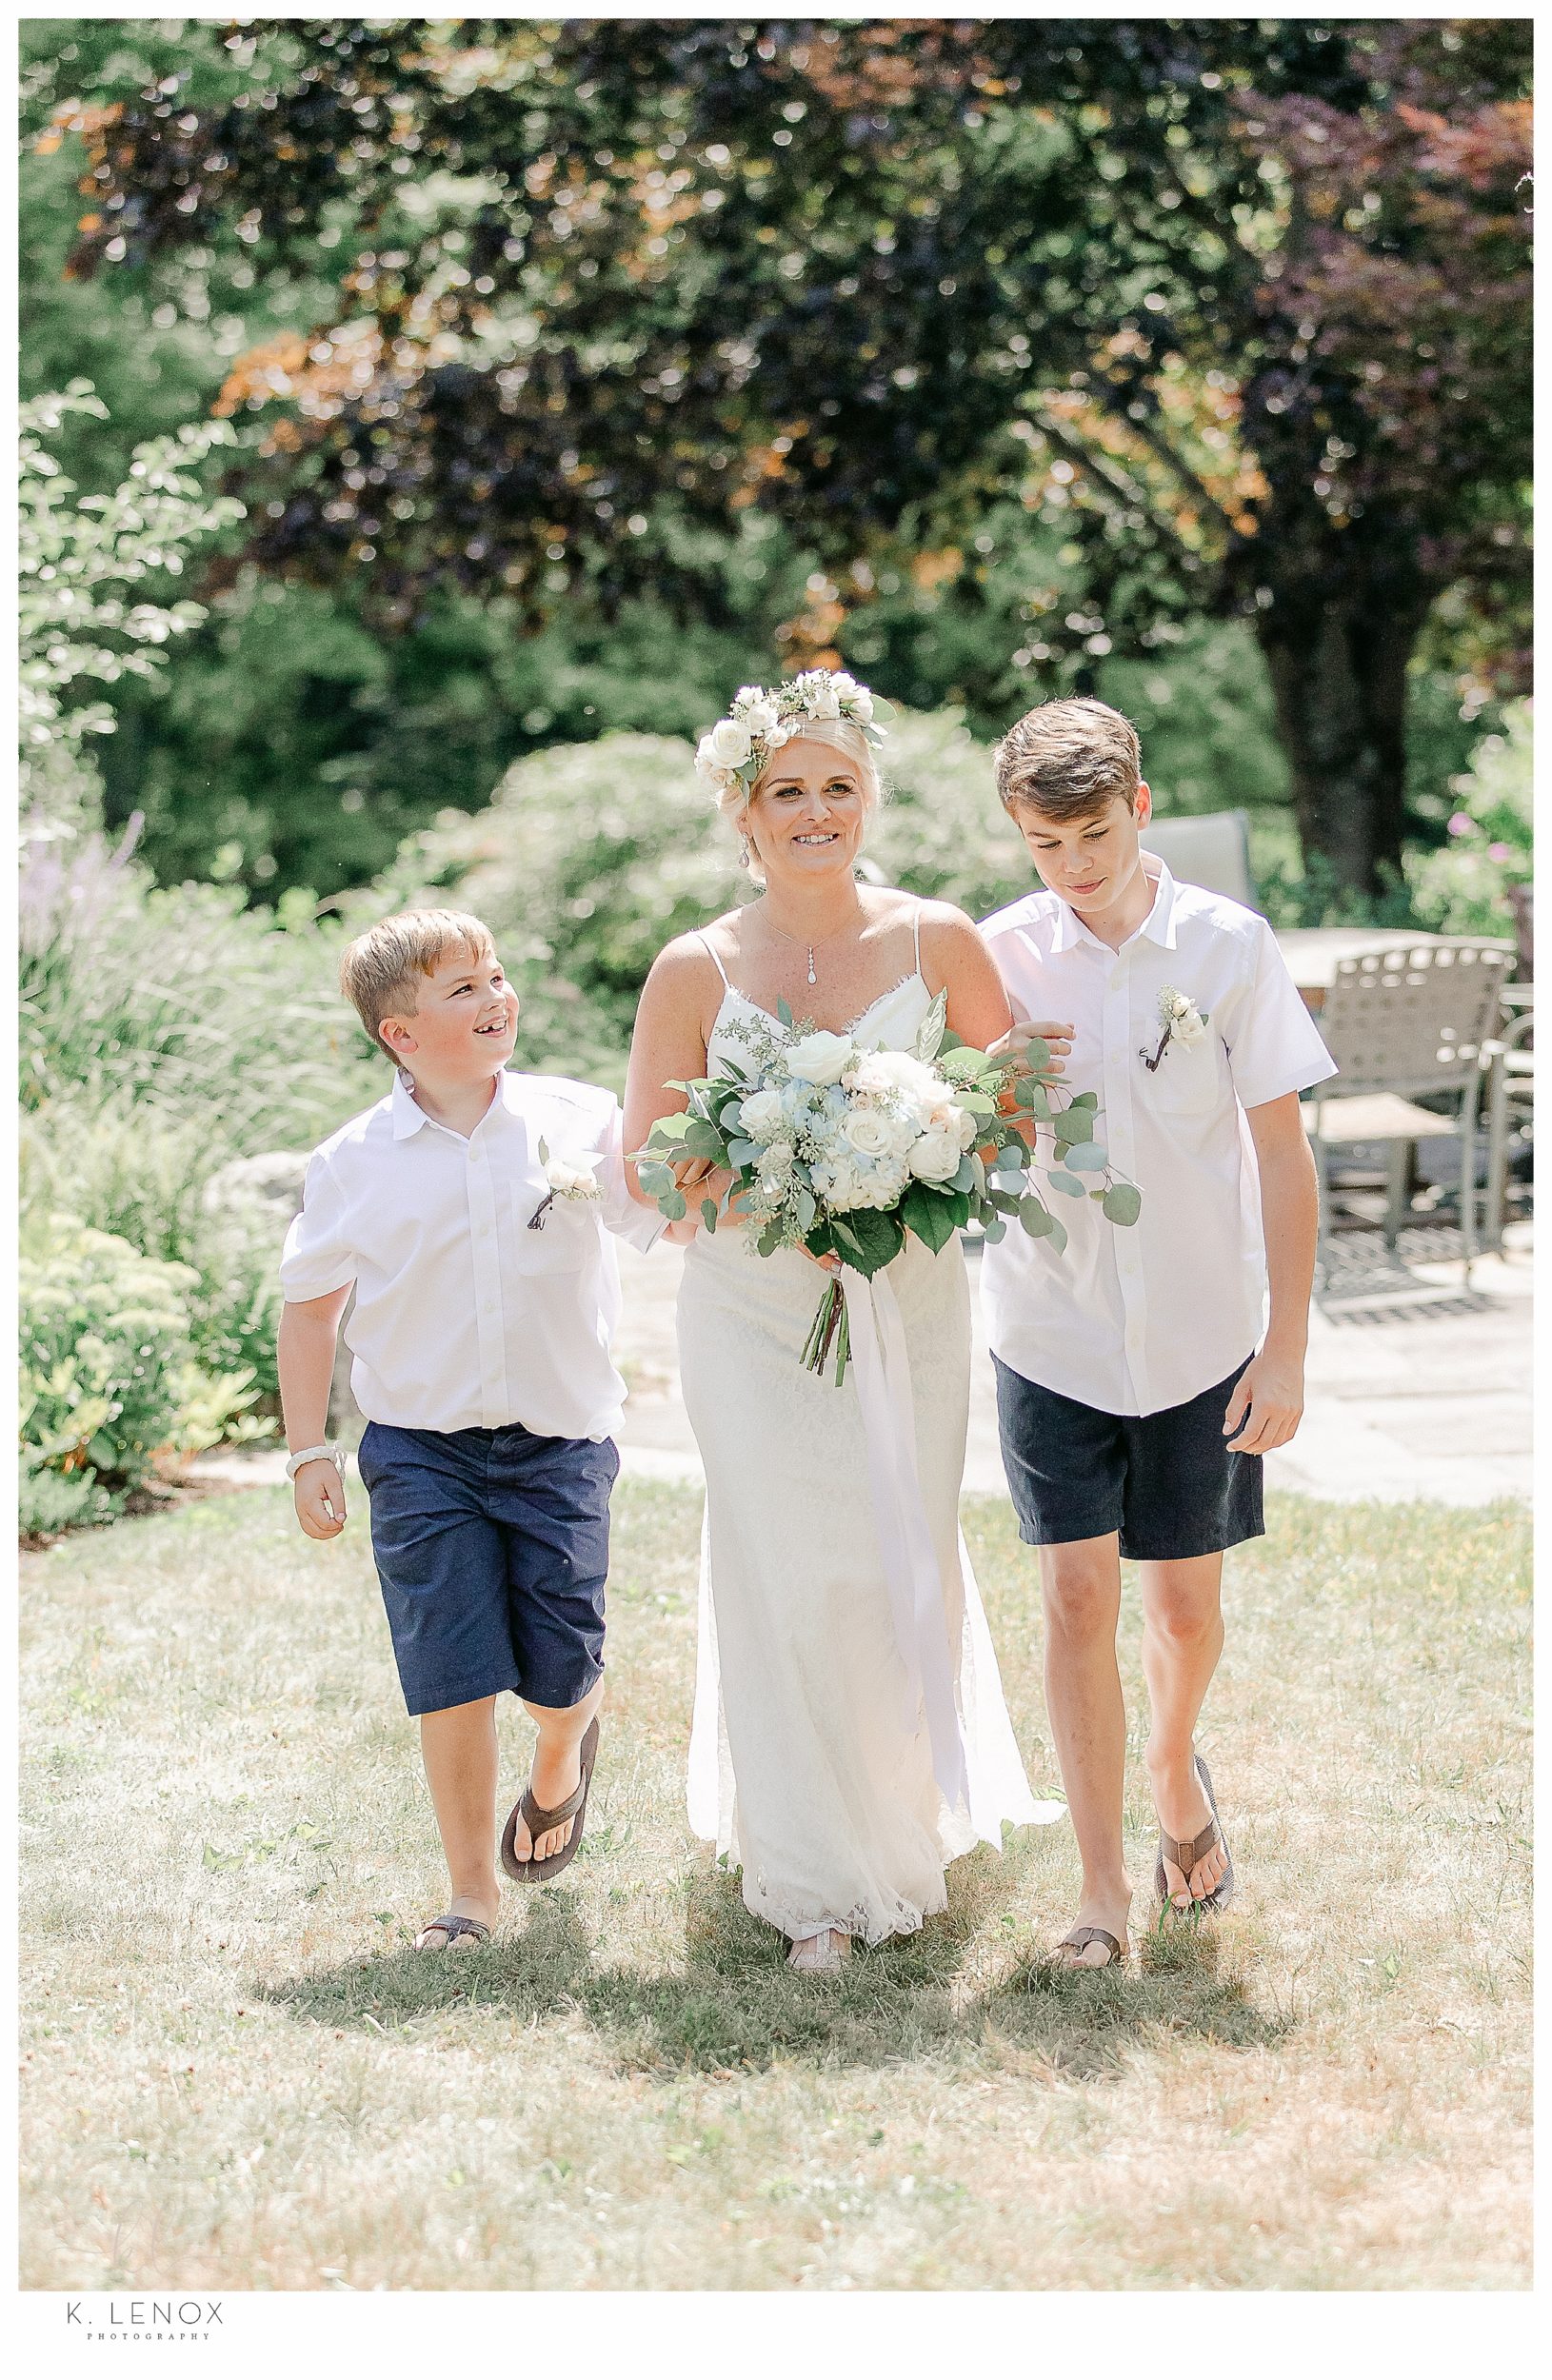 Light and Airy Micro Wedding at Moran Estates- Son's giving their mom away as part of the ceremony